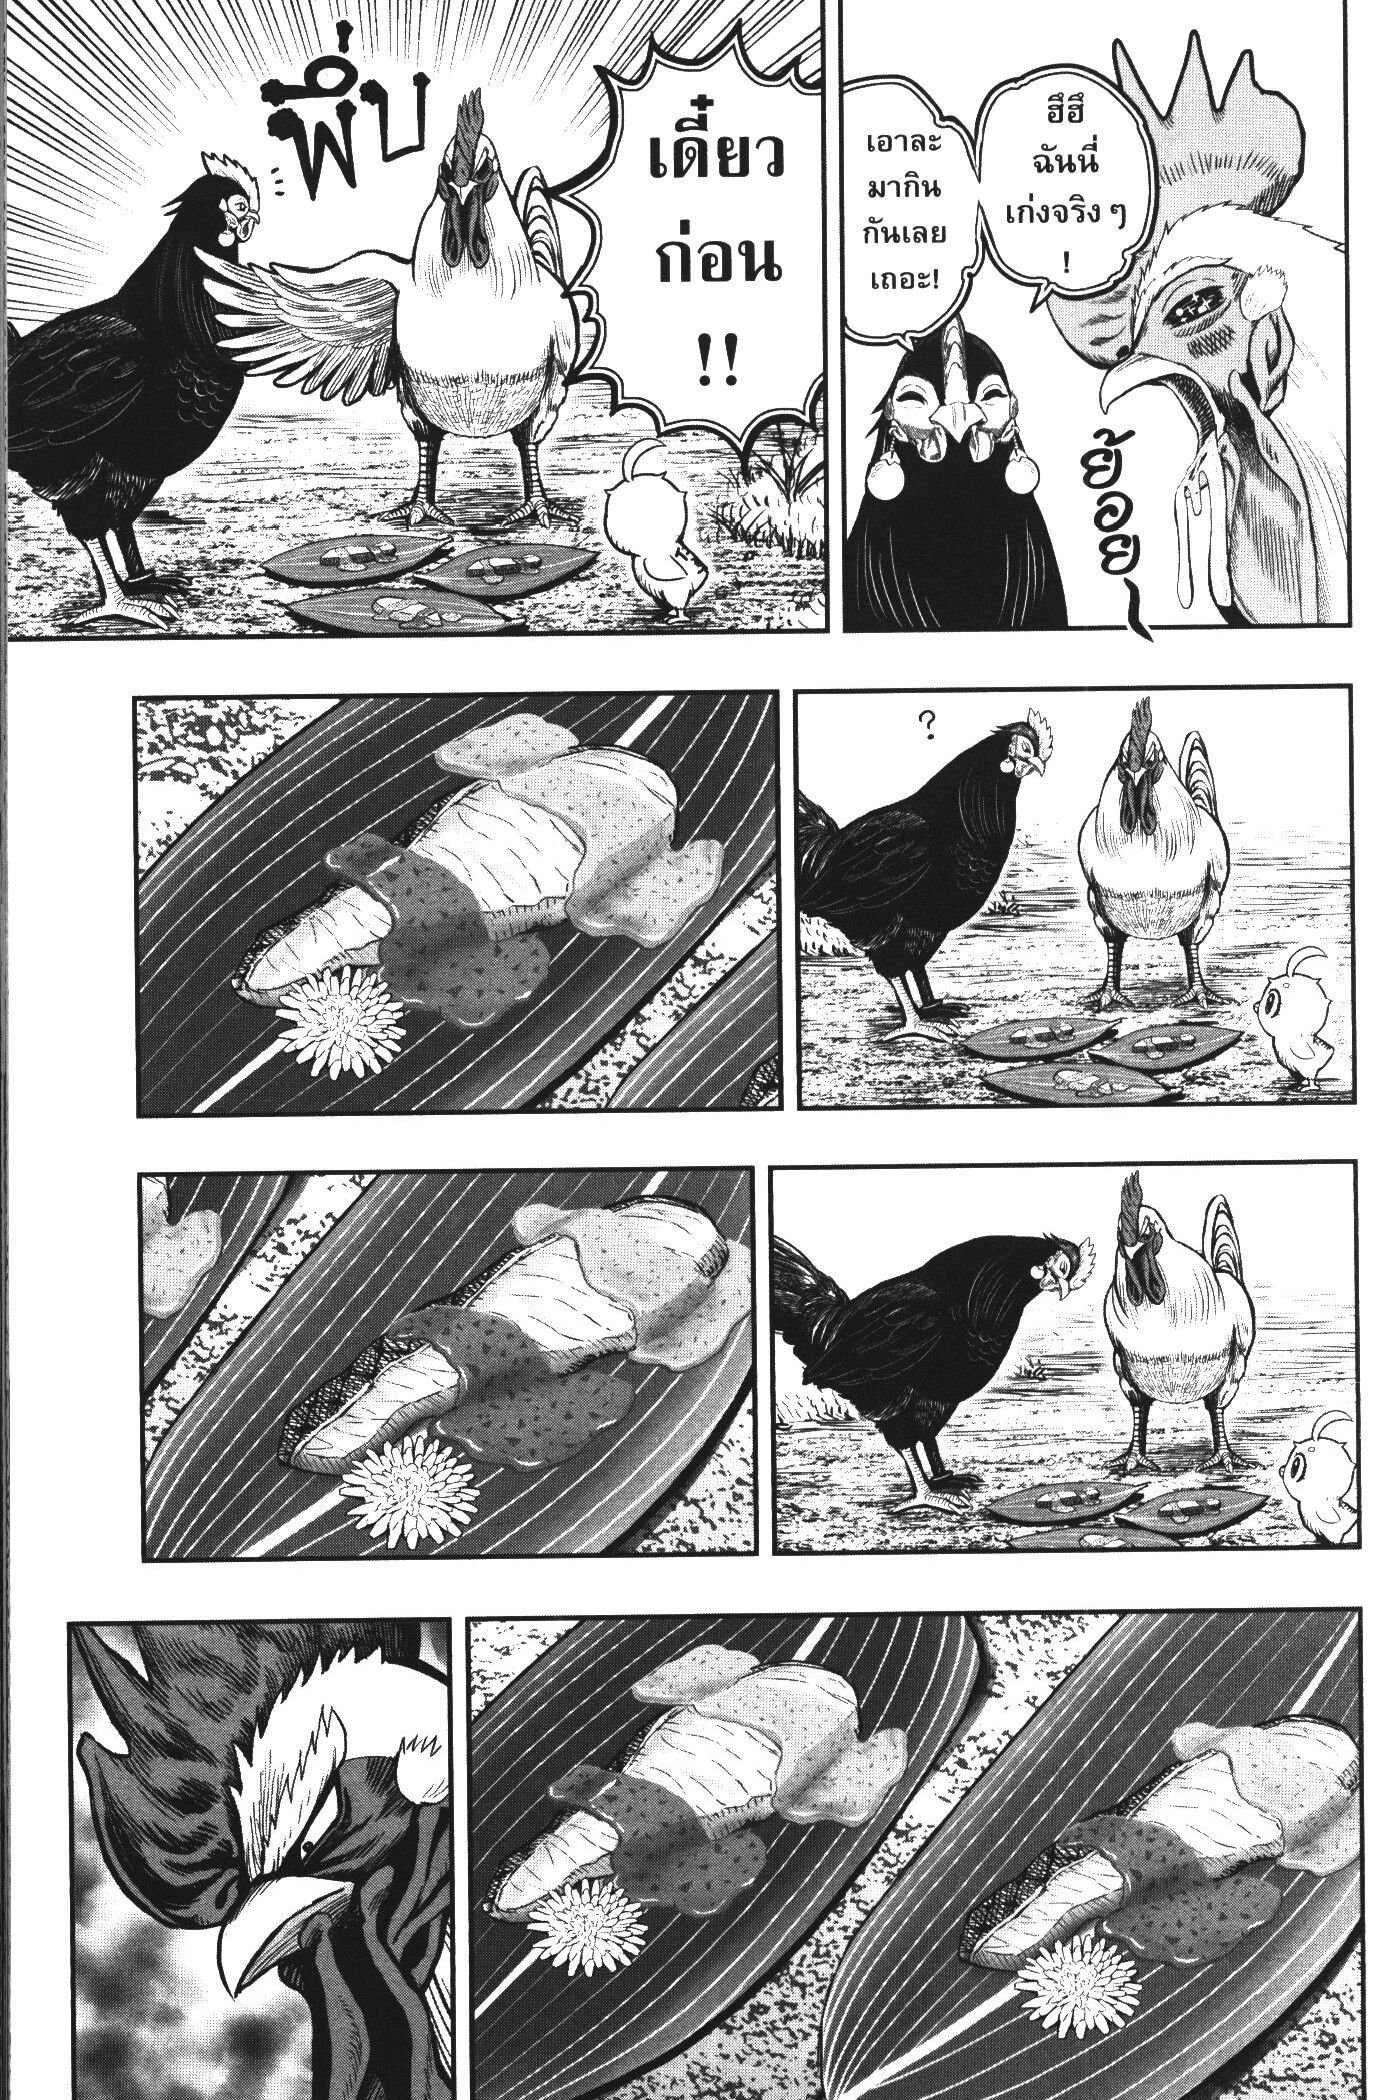 Rooster Fighter 18 (11)